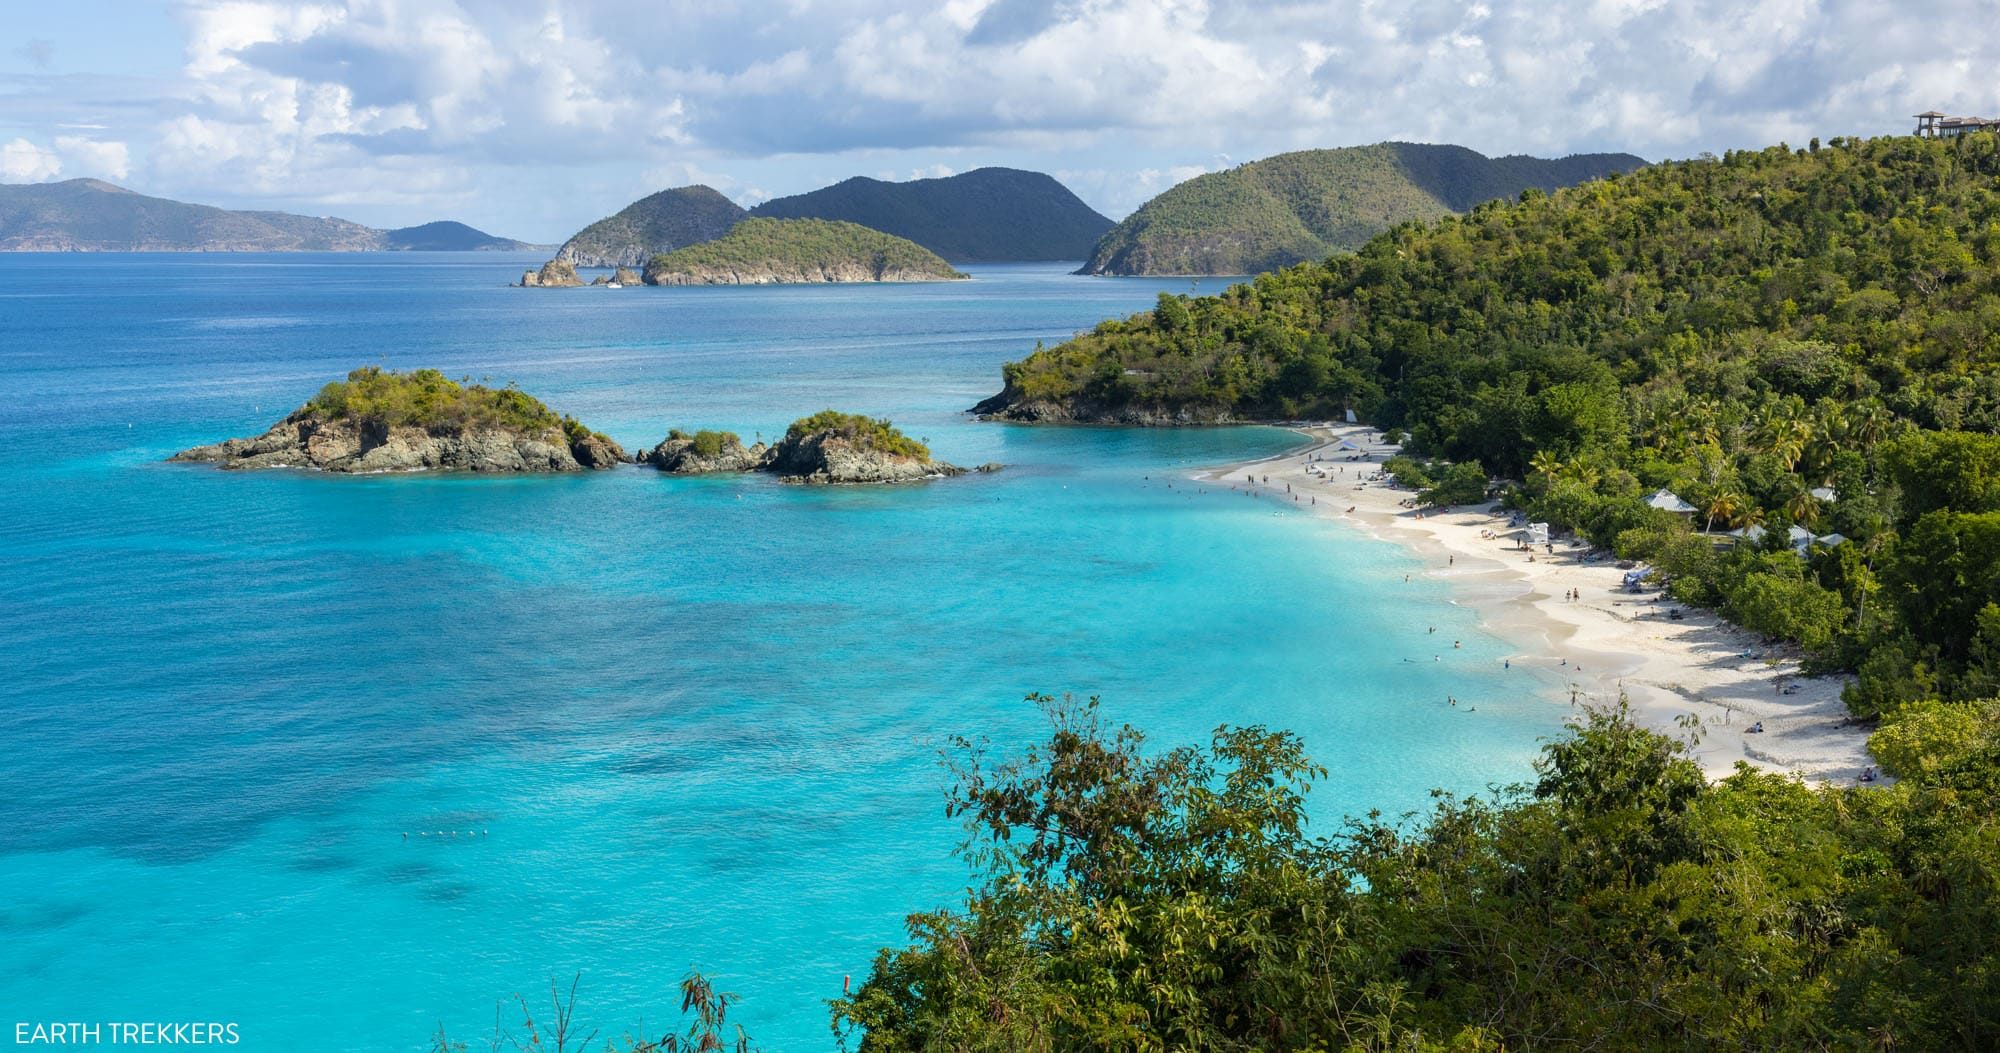 Featured image for “Top 10 Things to Do in Virgin Islands National Park”